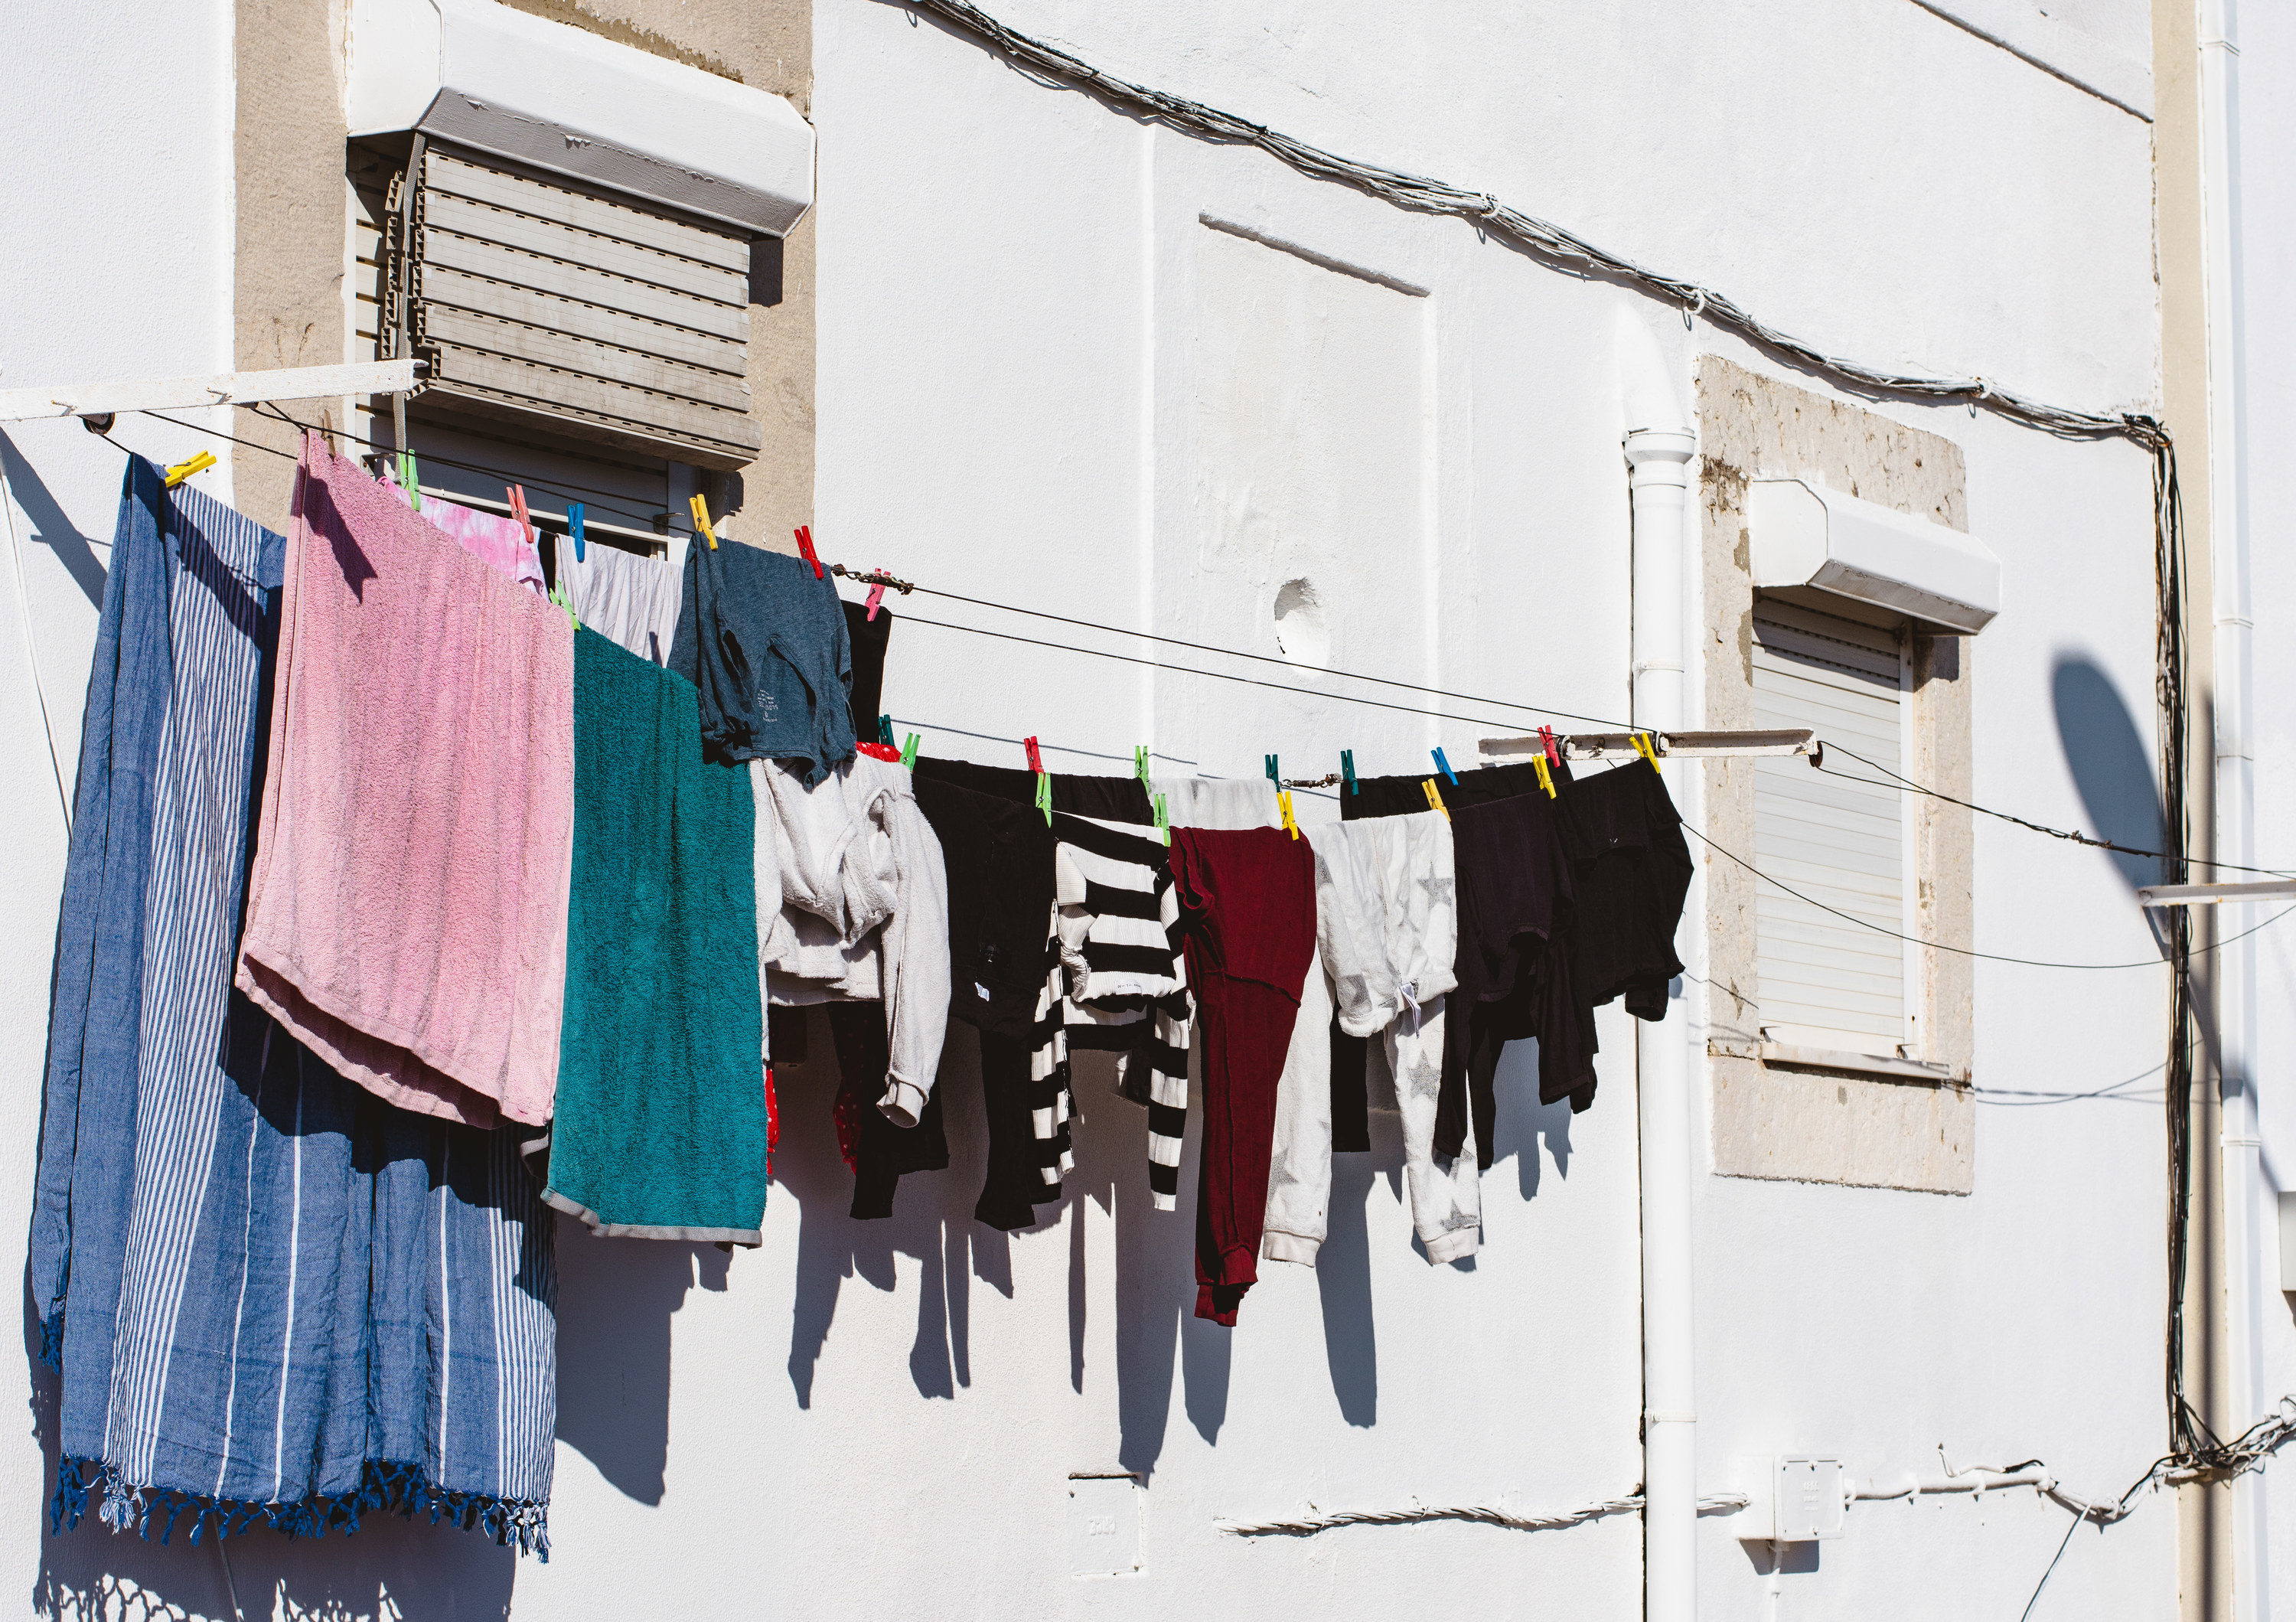 laundry hanging up to dry on the side of a building